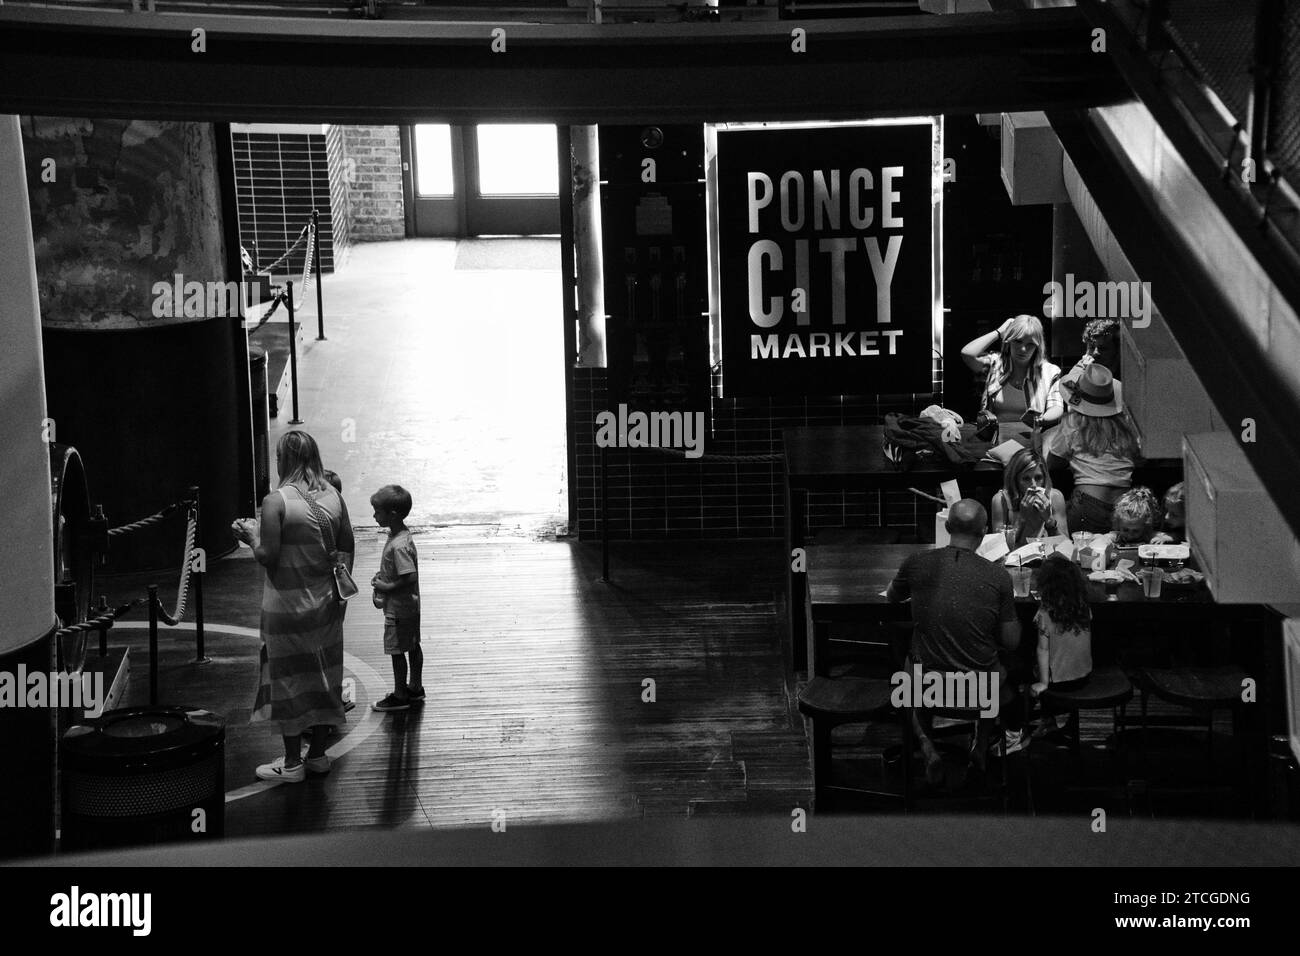 Atlanta, GA- june 19,2021: Ponce City market a vibrant converted historic building now a market with Restaurants, shops bustling with young adults Stock Photo